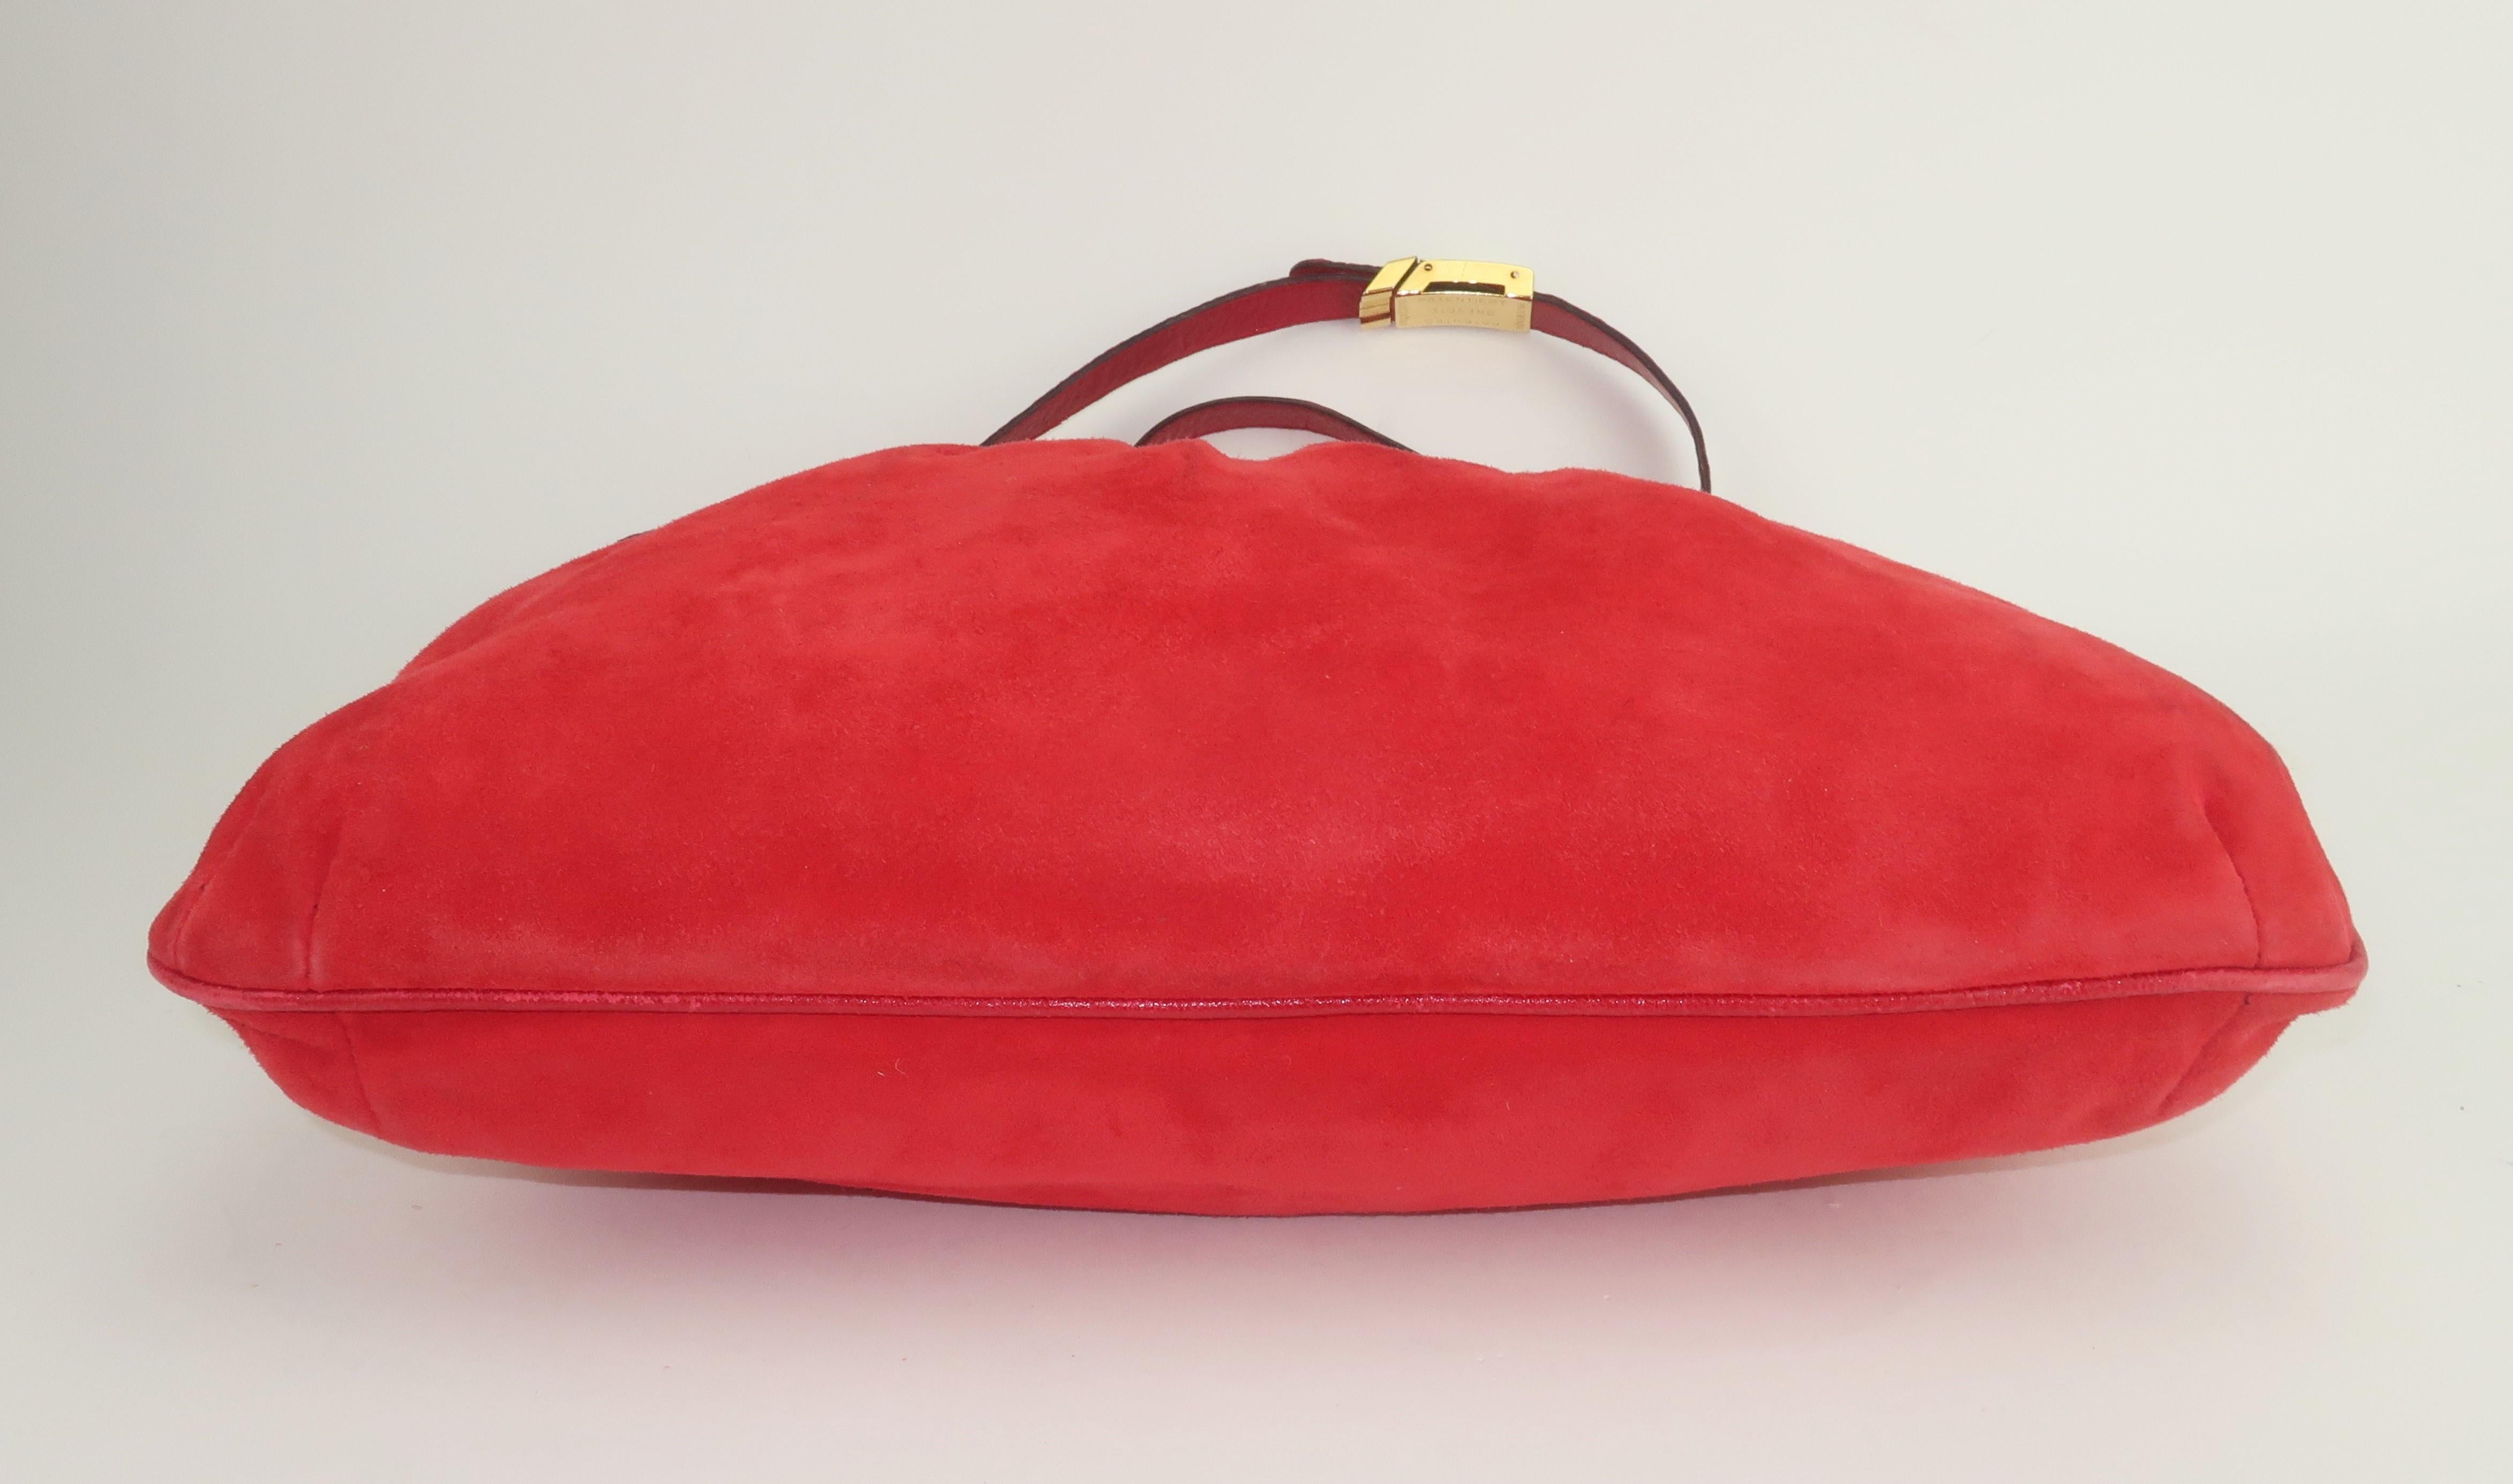 Sergio Rossi Red Suede Leather Handbag, 1970's For Sale 2